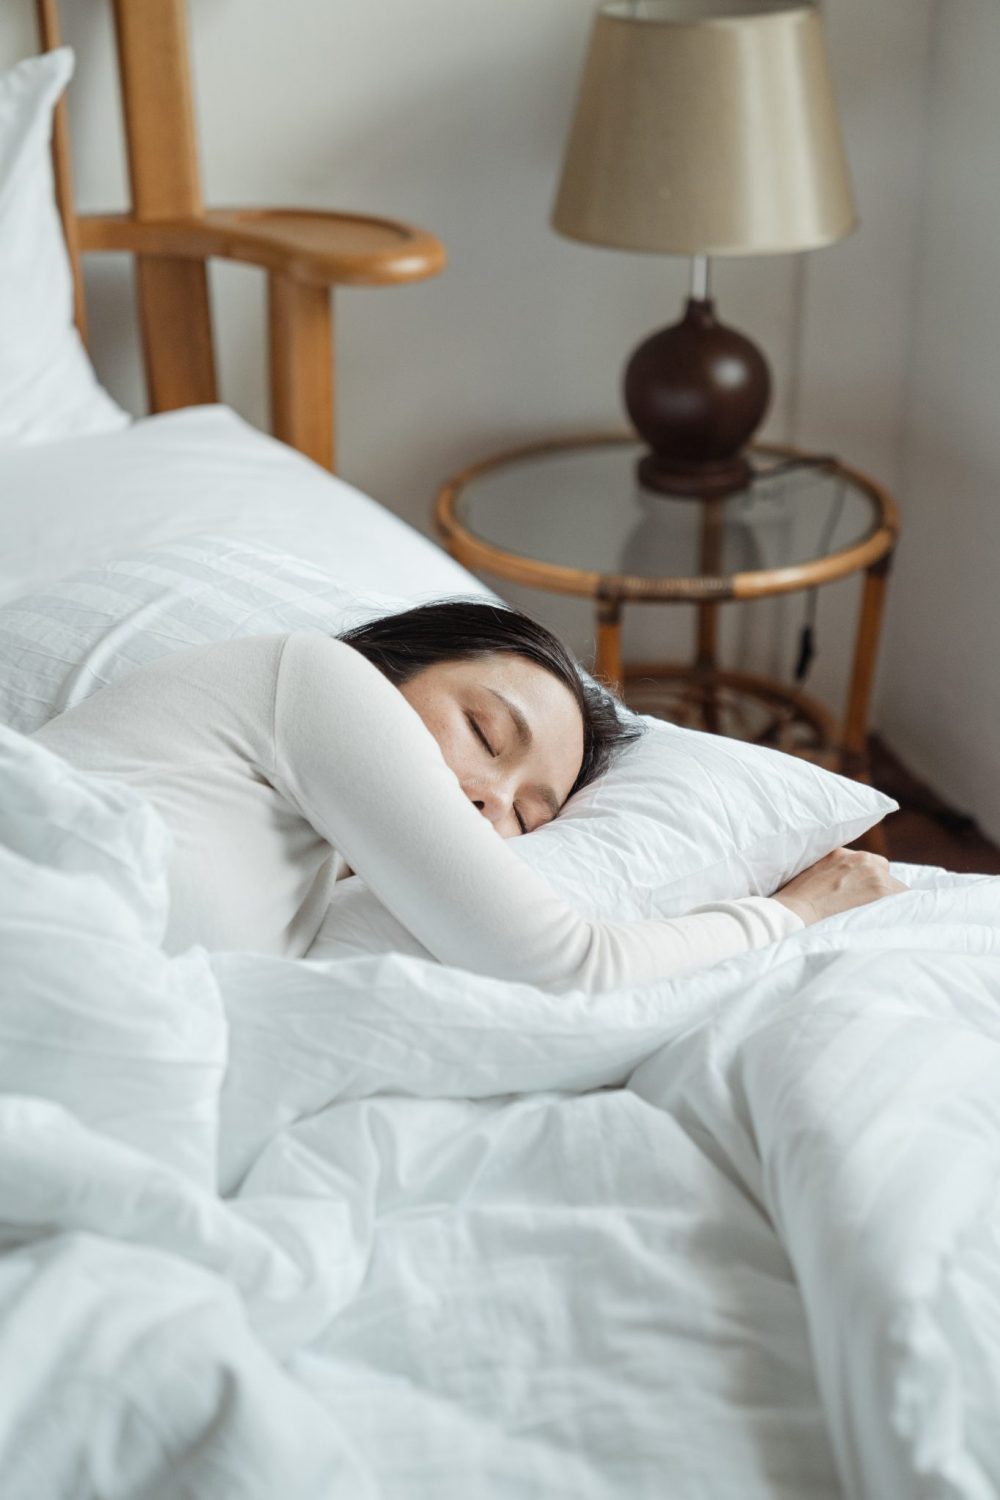 Tips for Getting a Good Night's Sleep and Controlling Insomnia